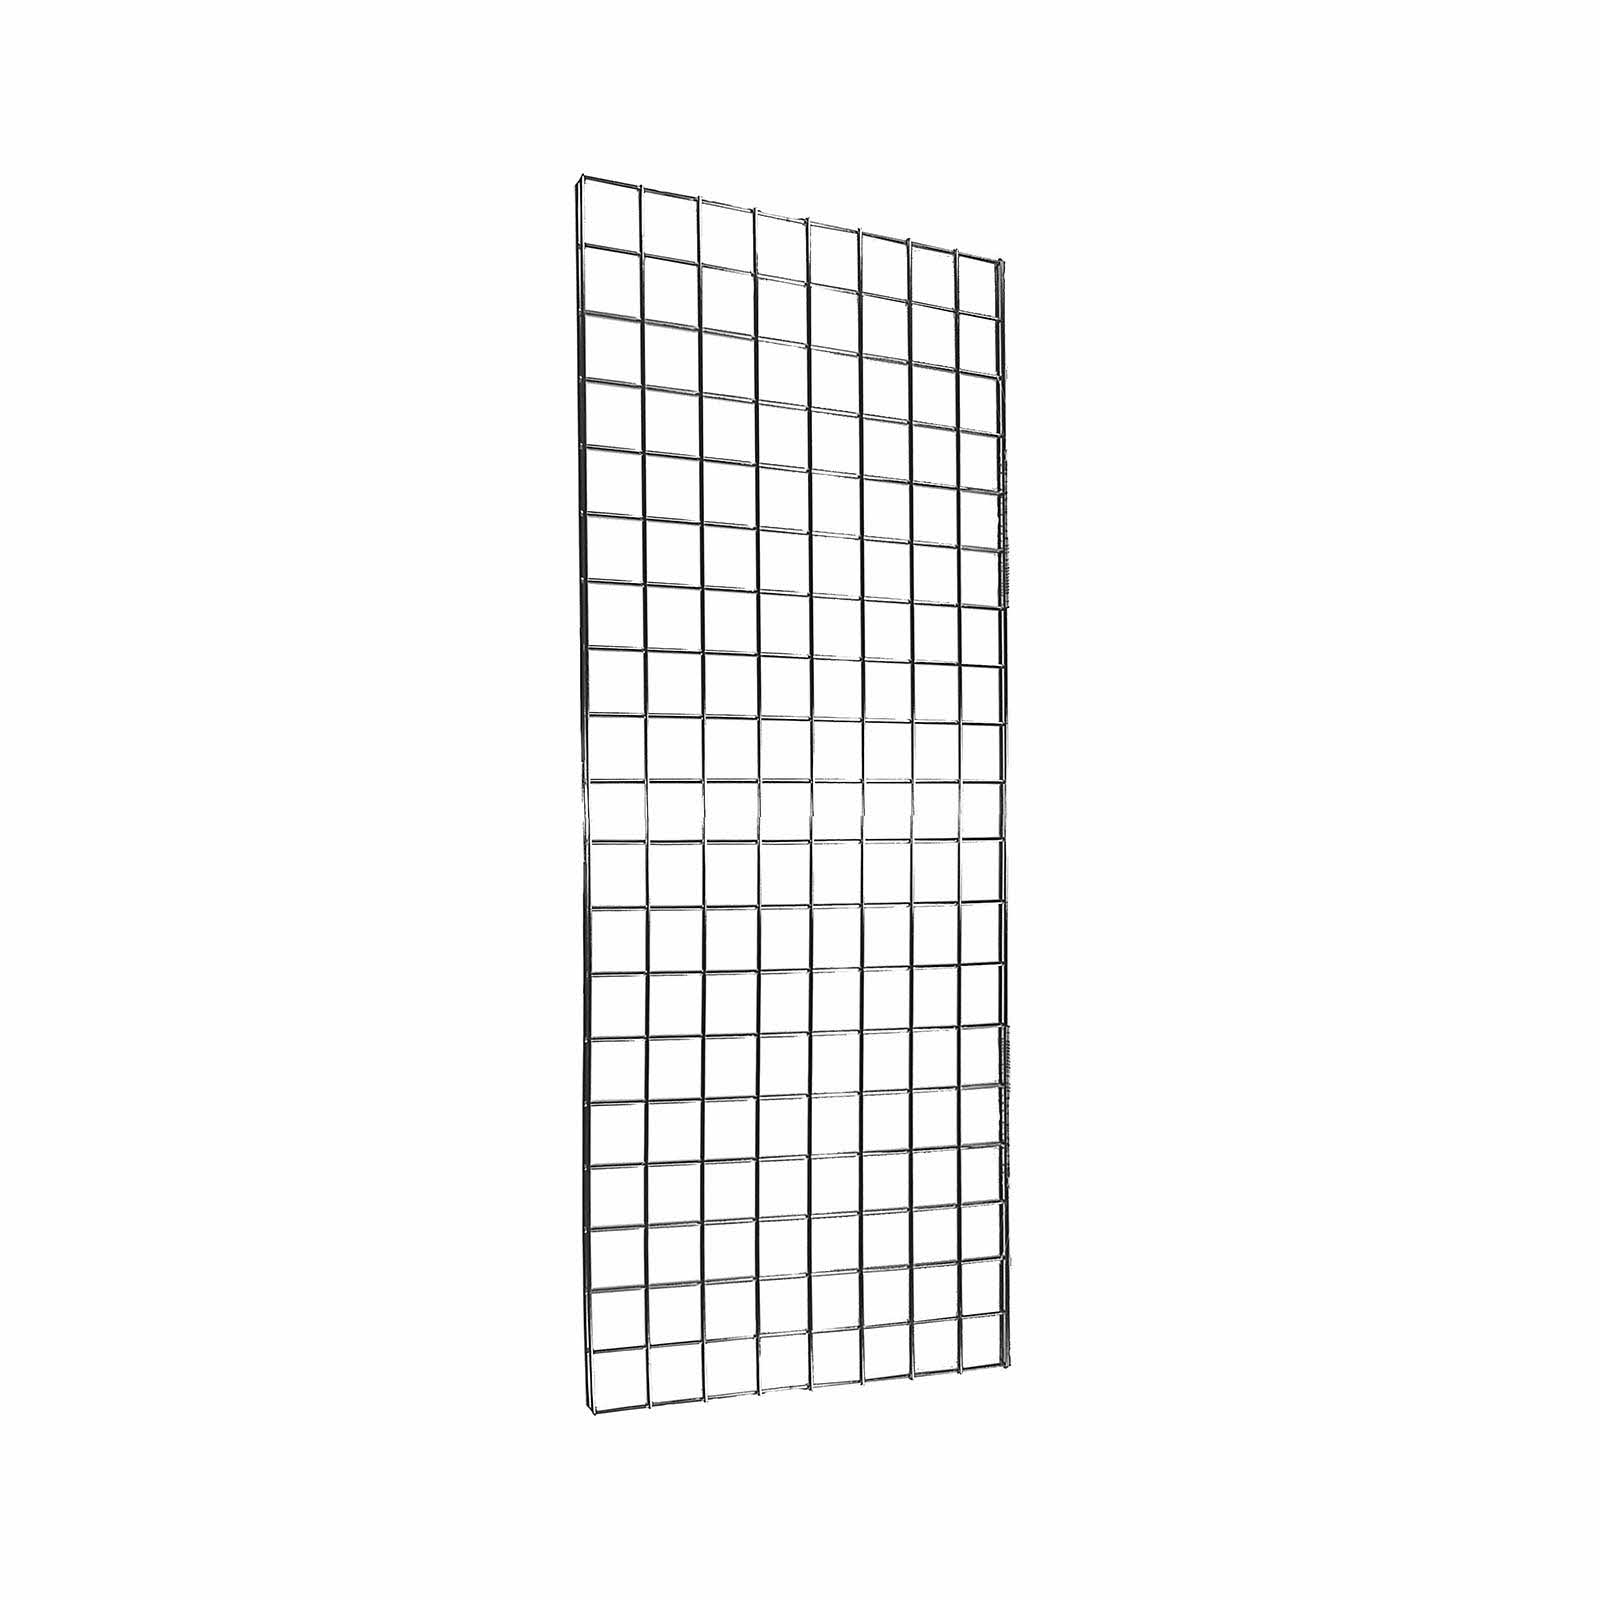 Grid Panel 5ft High / 1525mm Heavy Duty Grid Mesh in Chrome Retail Shop Fittings (E3) 